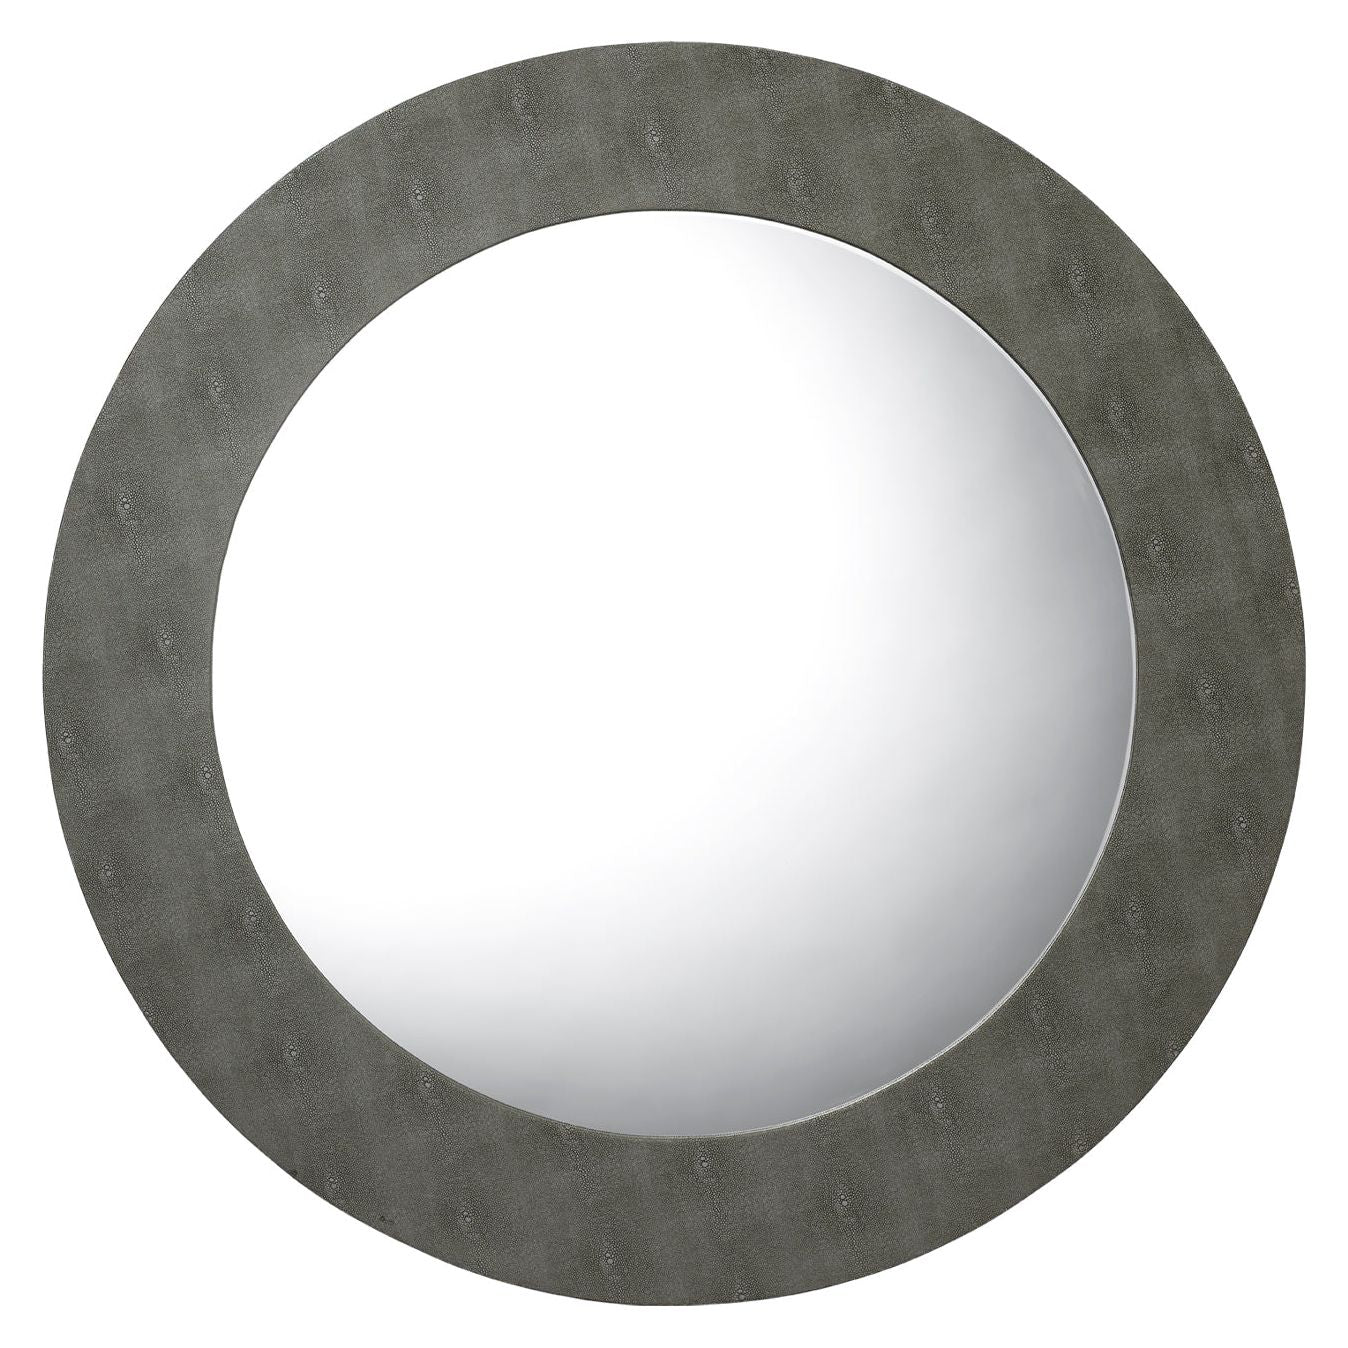 Jamie Young Company - LS6CHESRNDGR - Chester Round Mirror - Chester - Grey